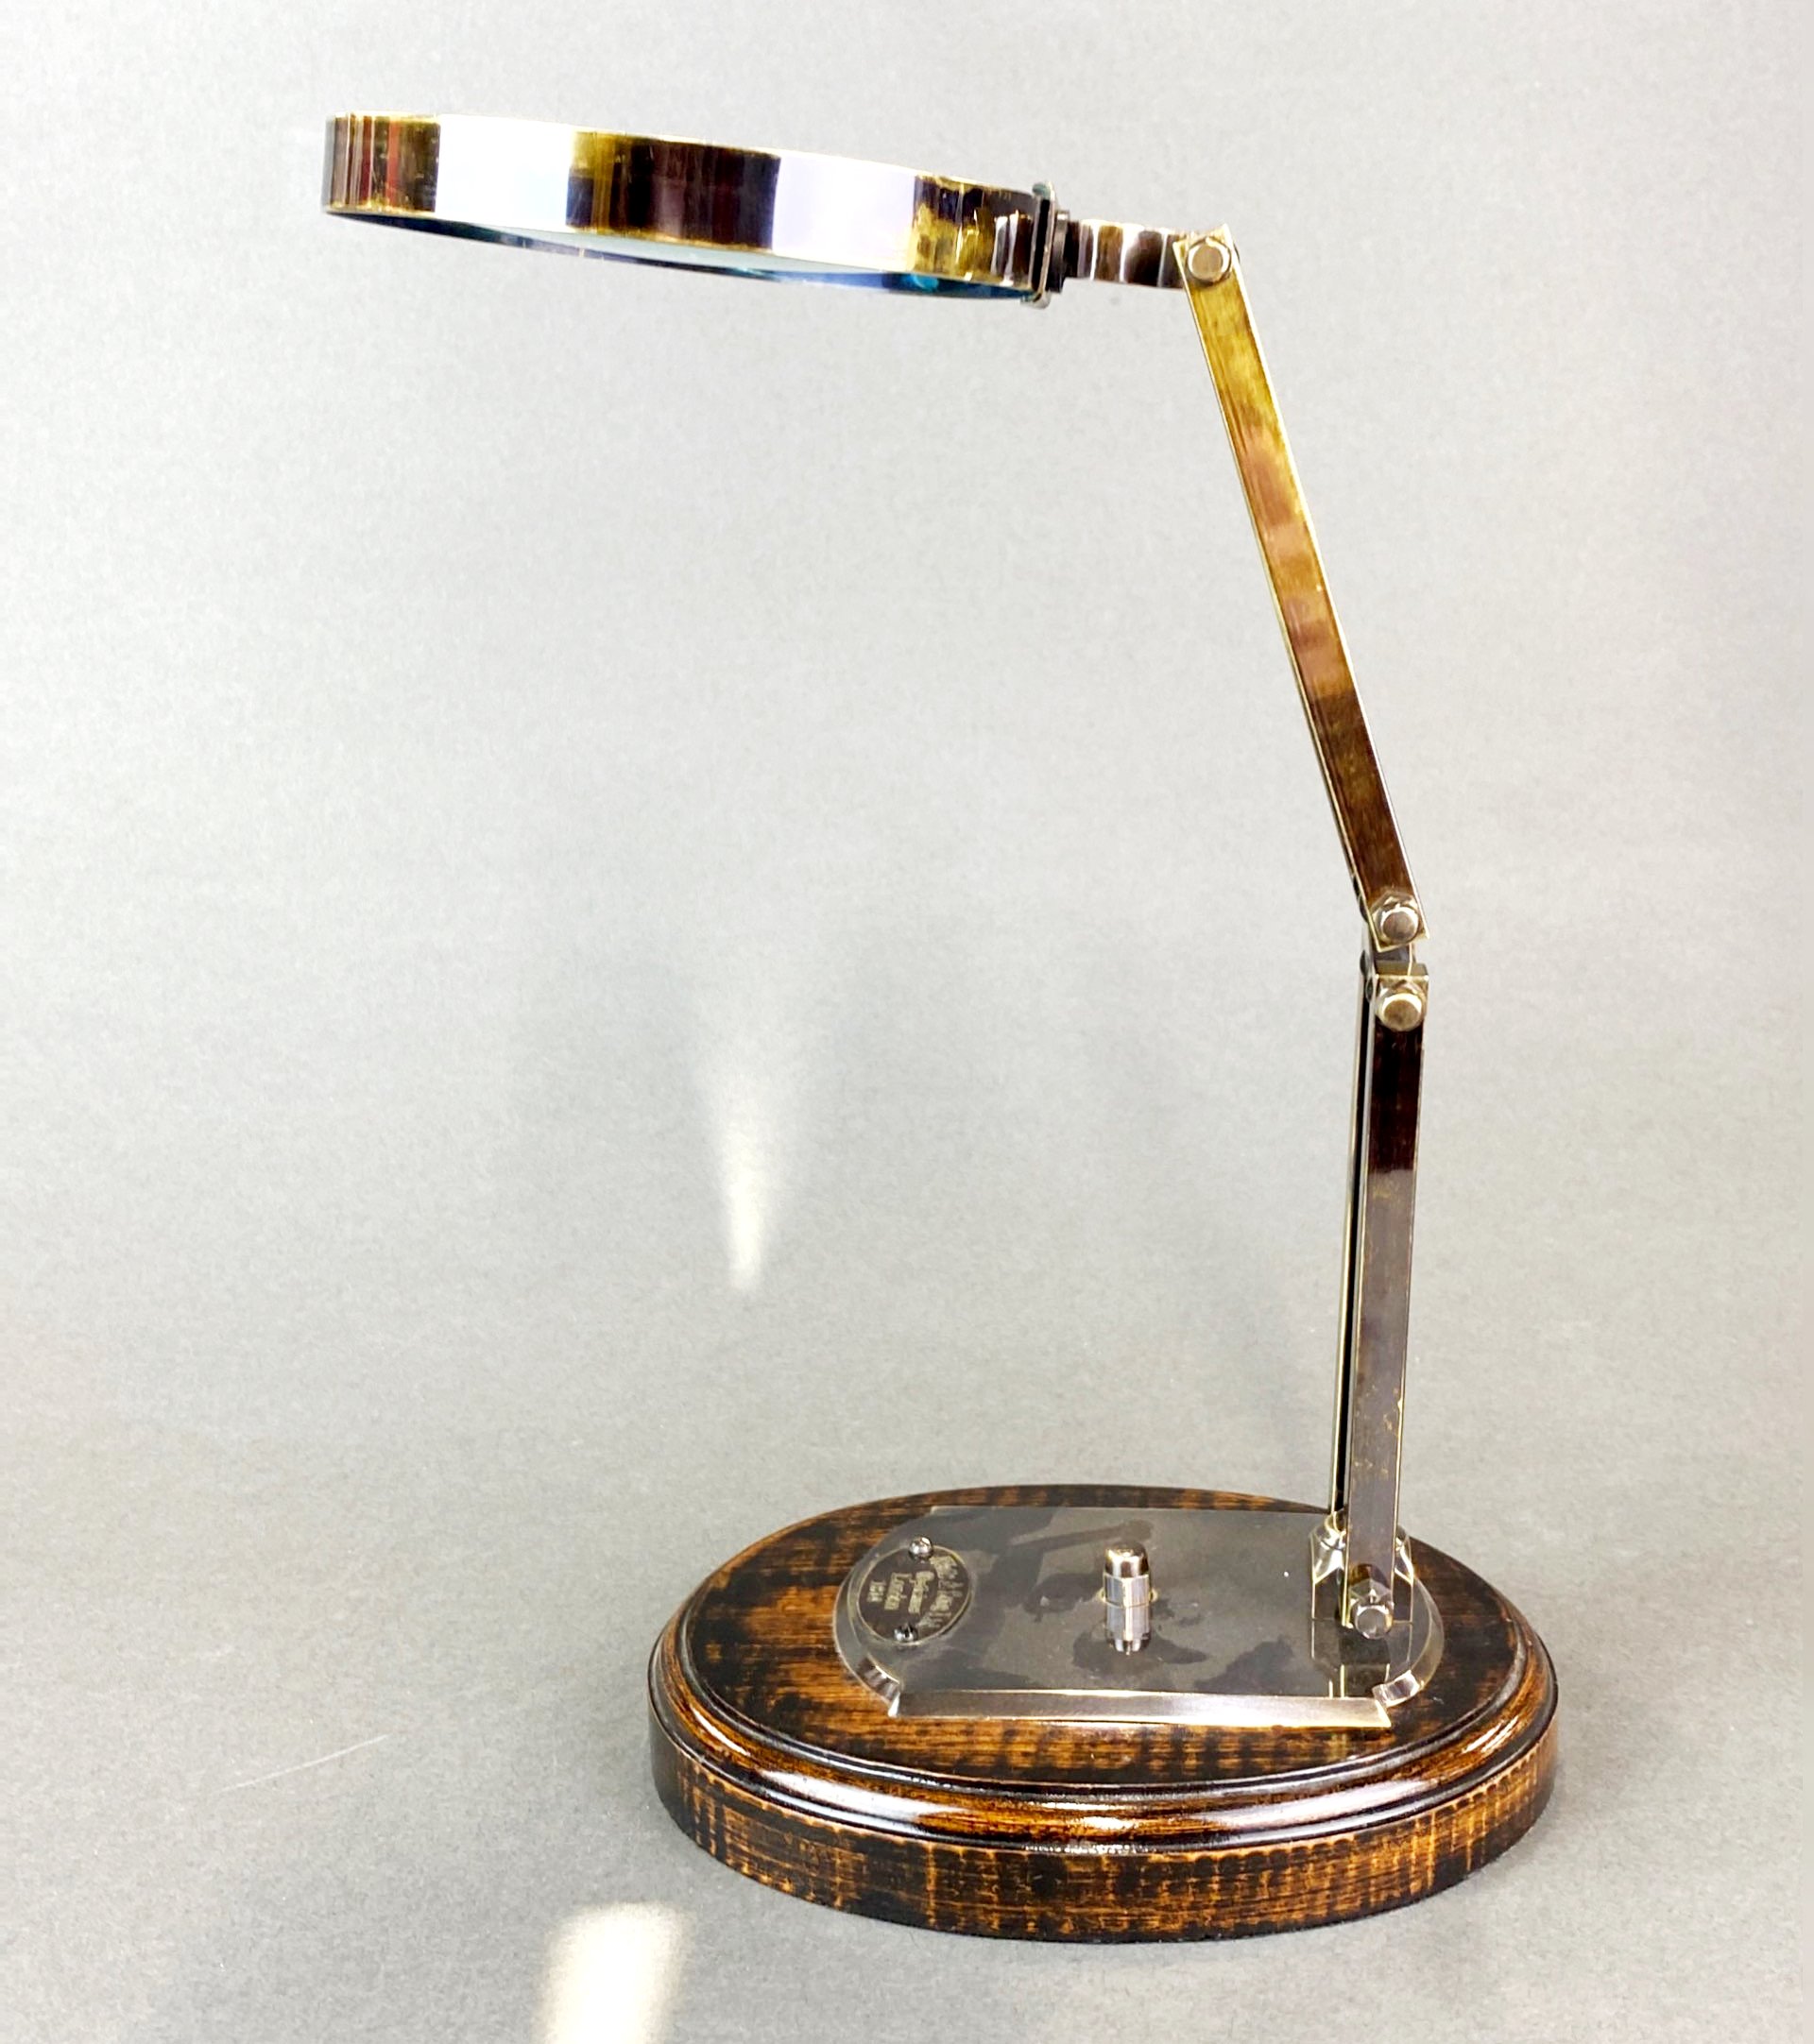 A desk magnifying glass. - Image 2 of 4